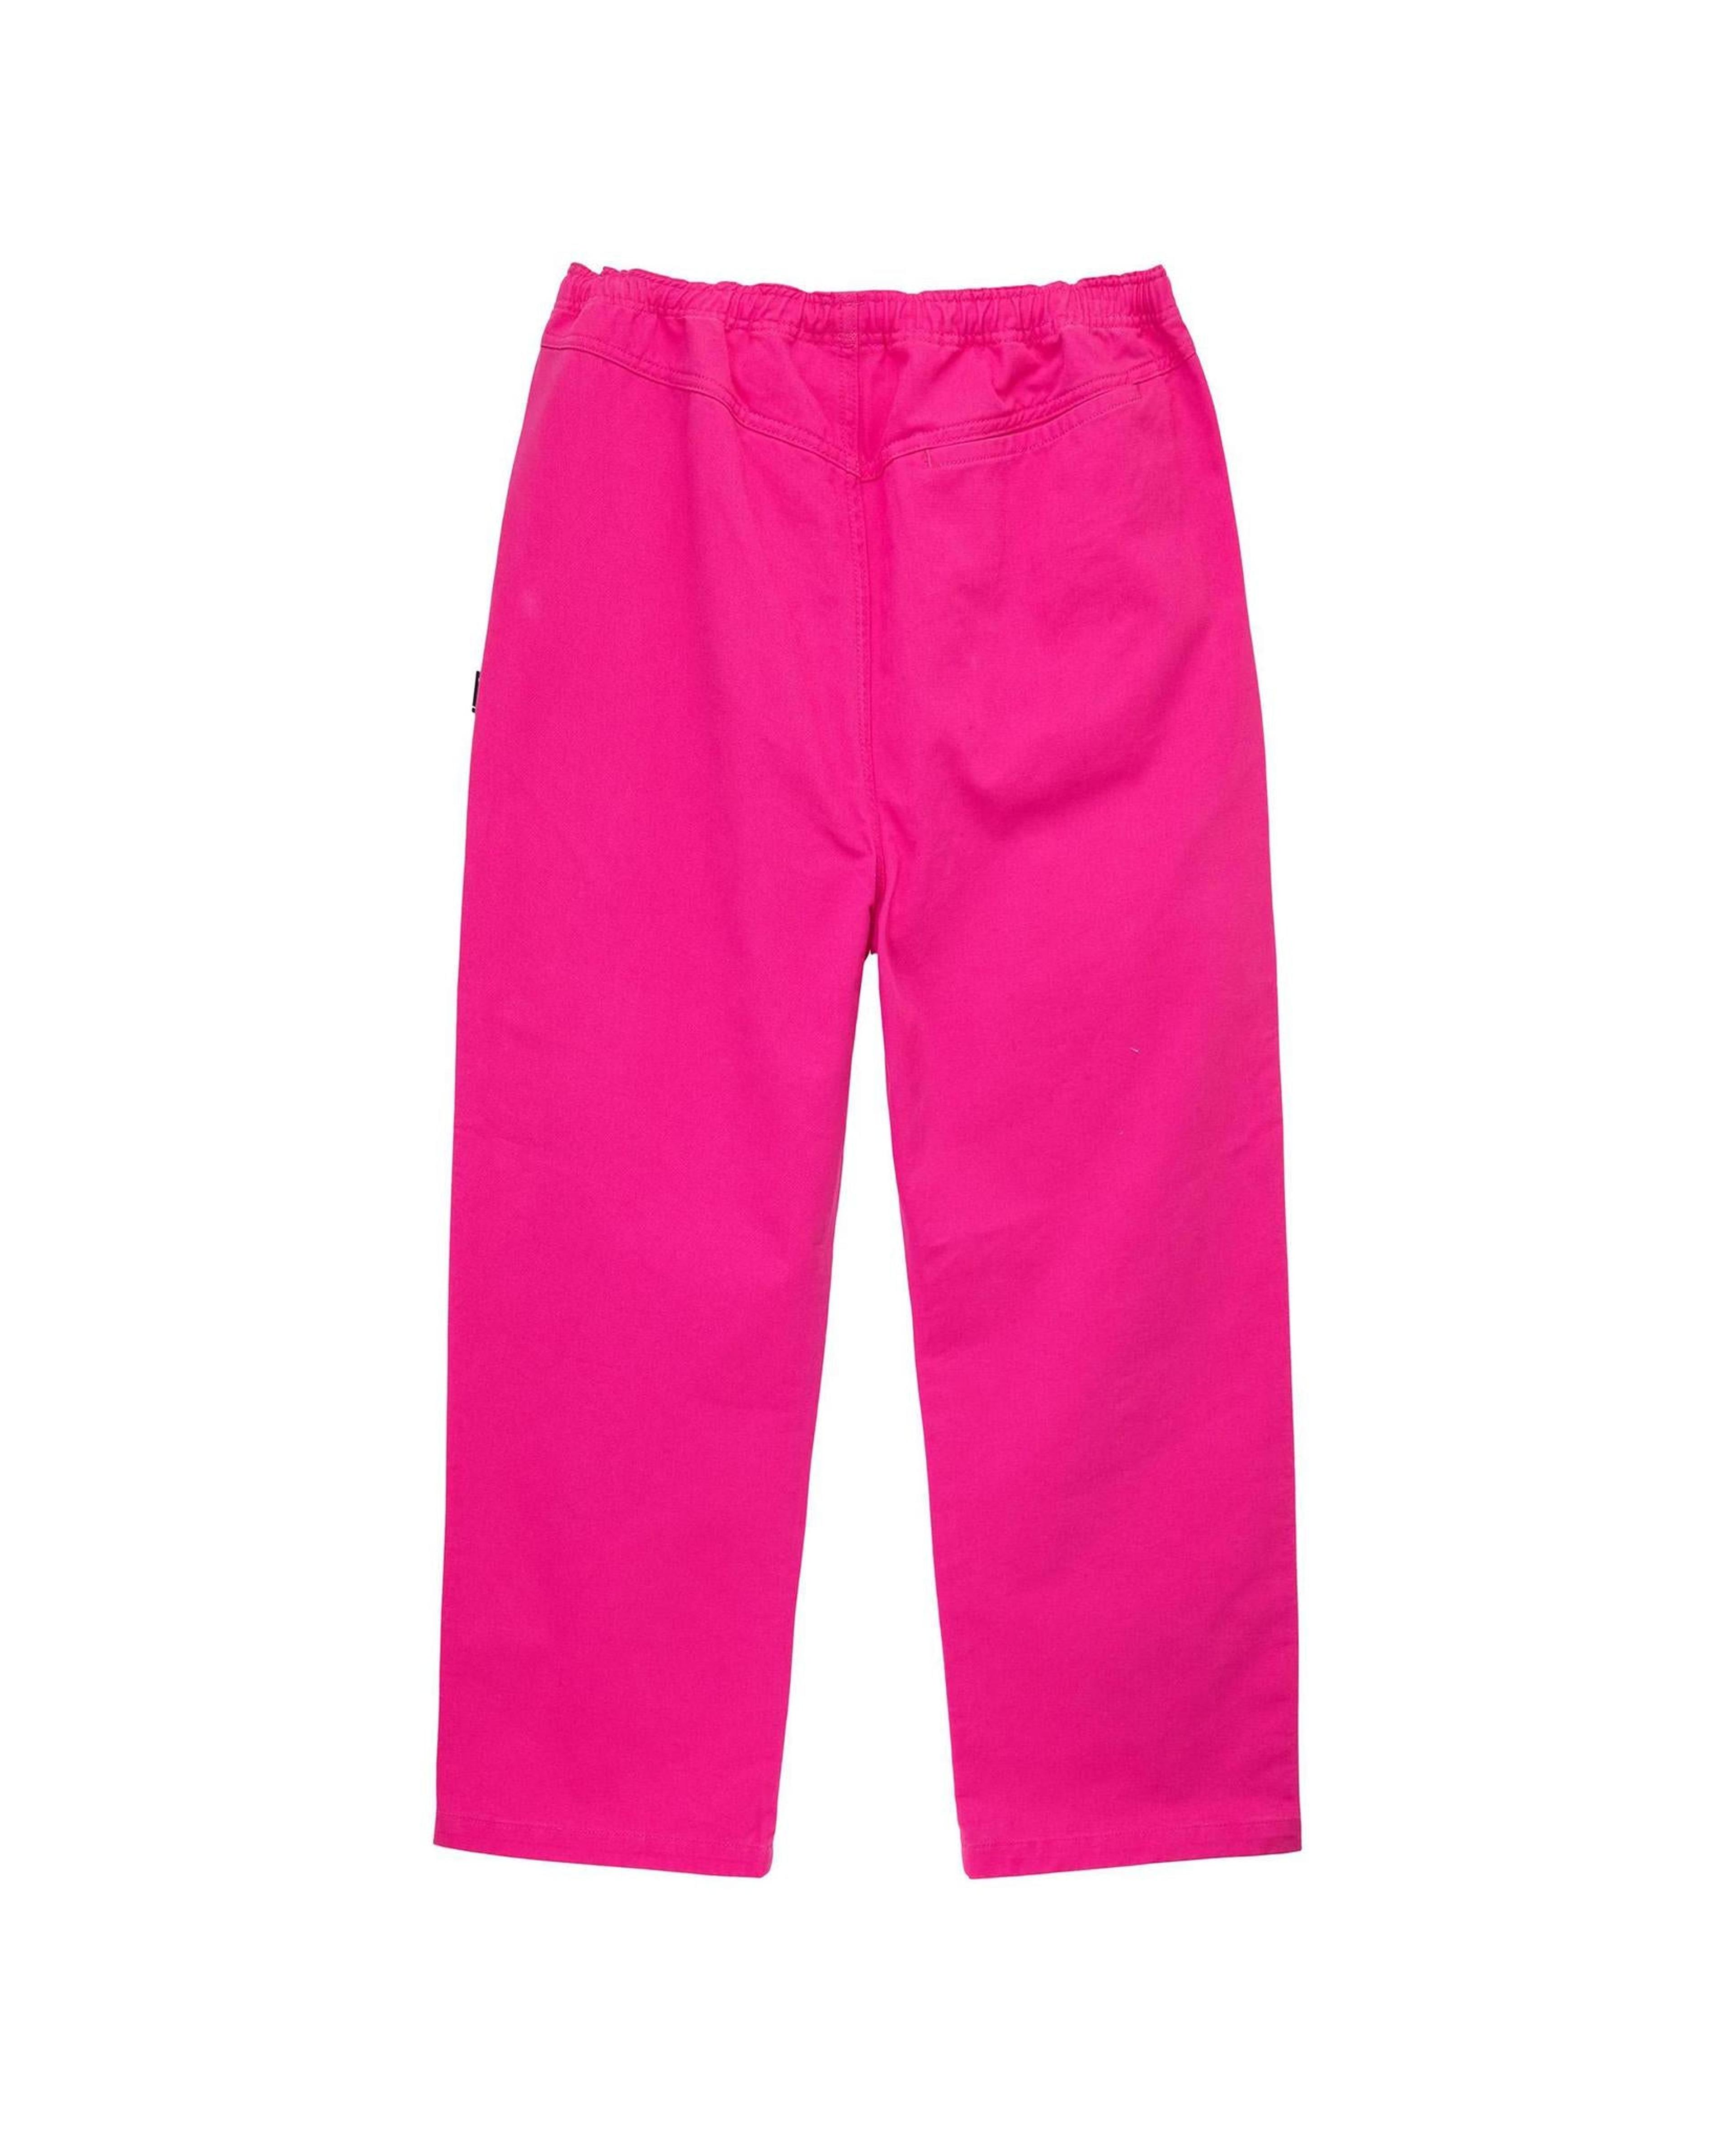 Alternate View 3 of Stussy Brushed Beach Pant